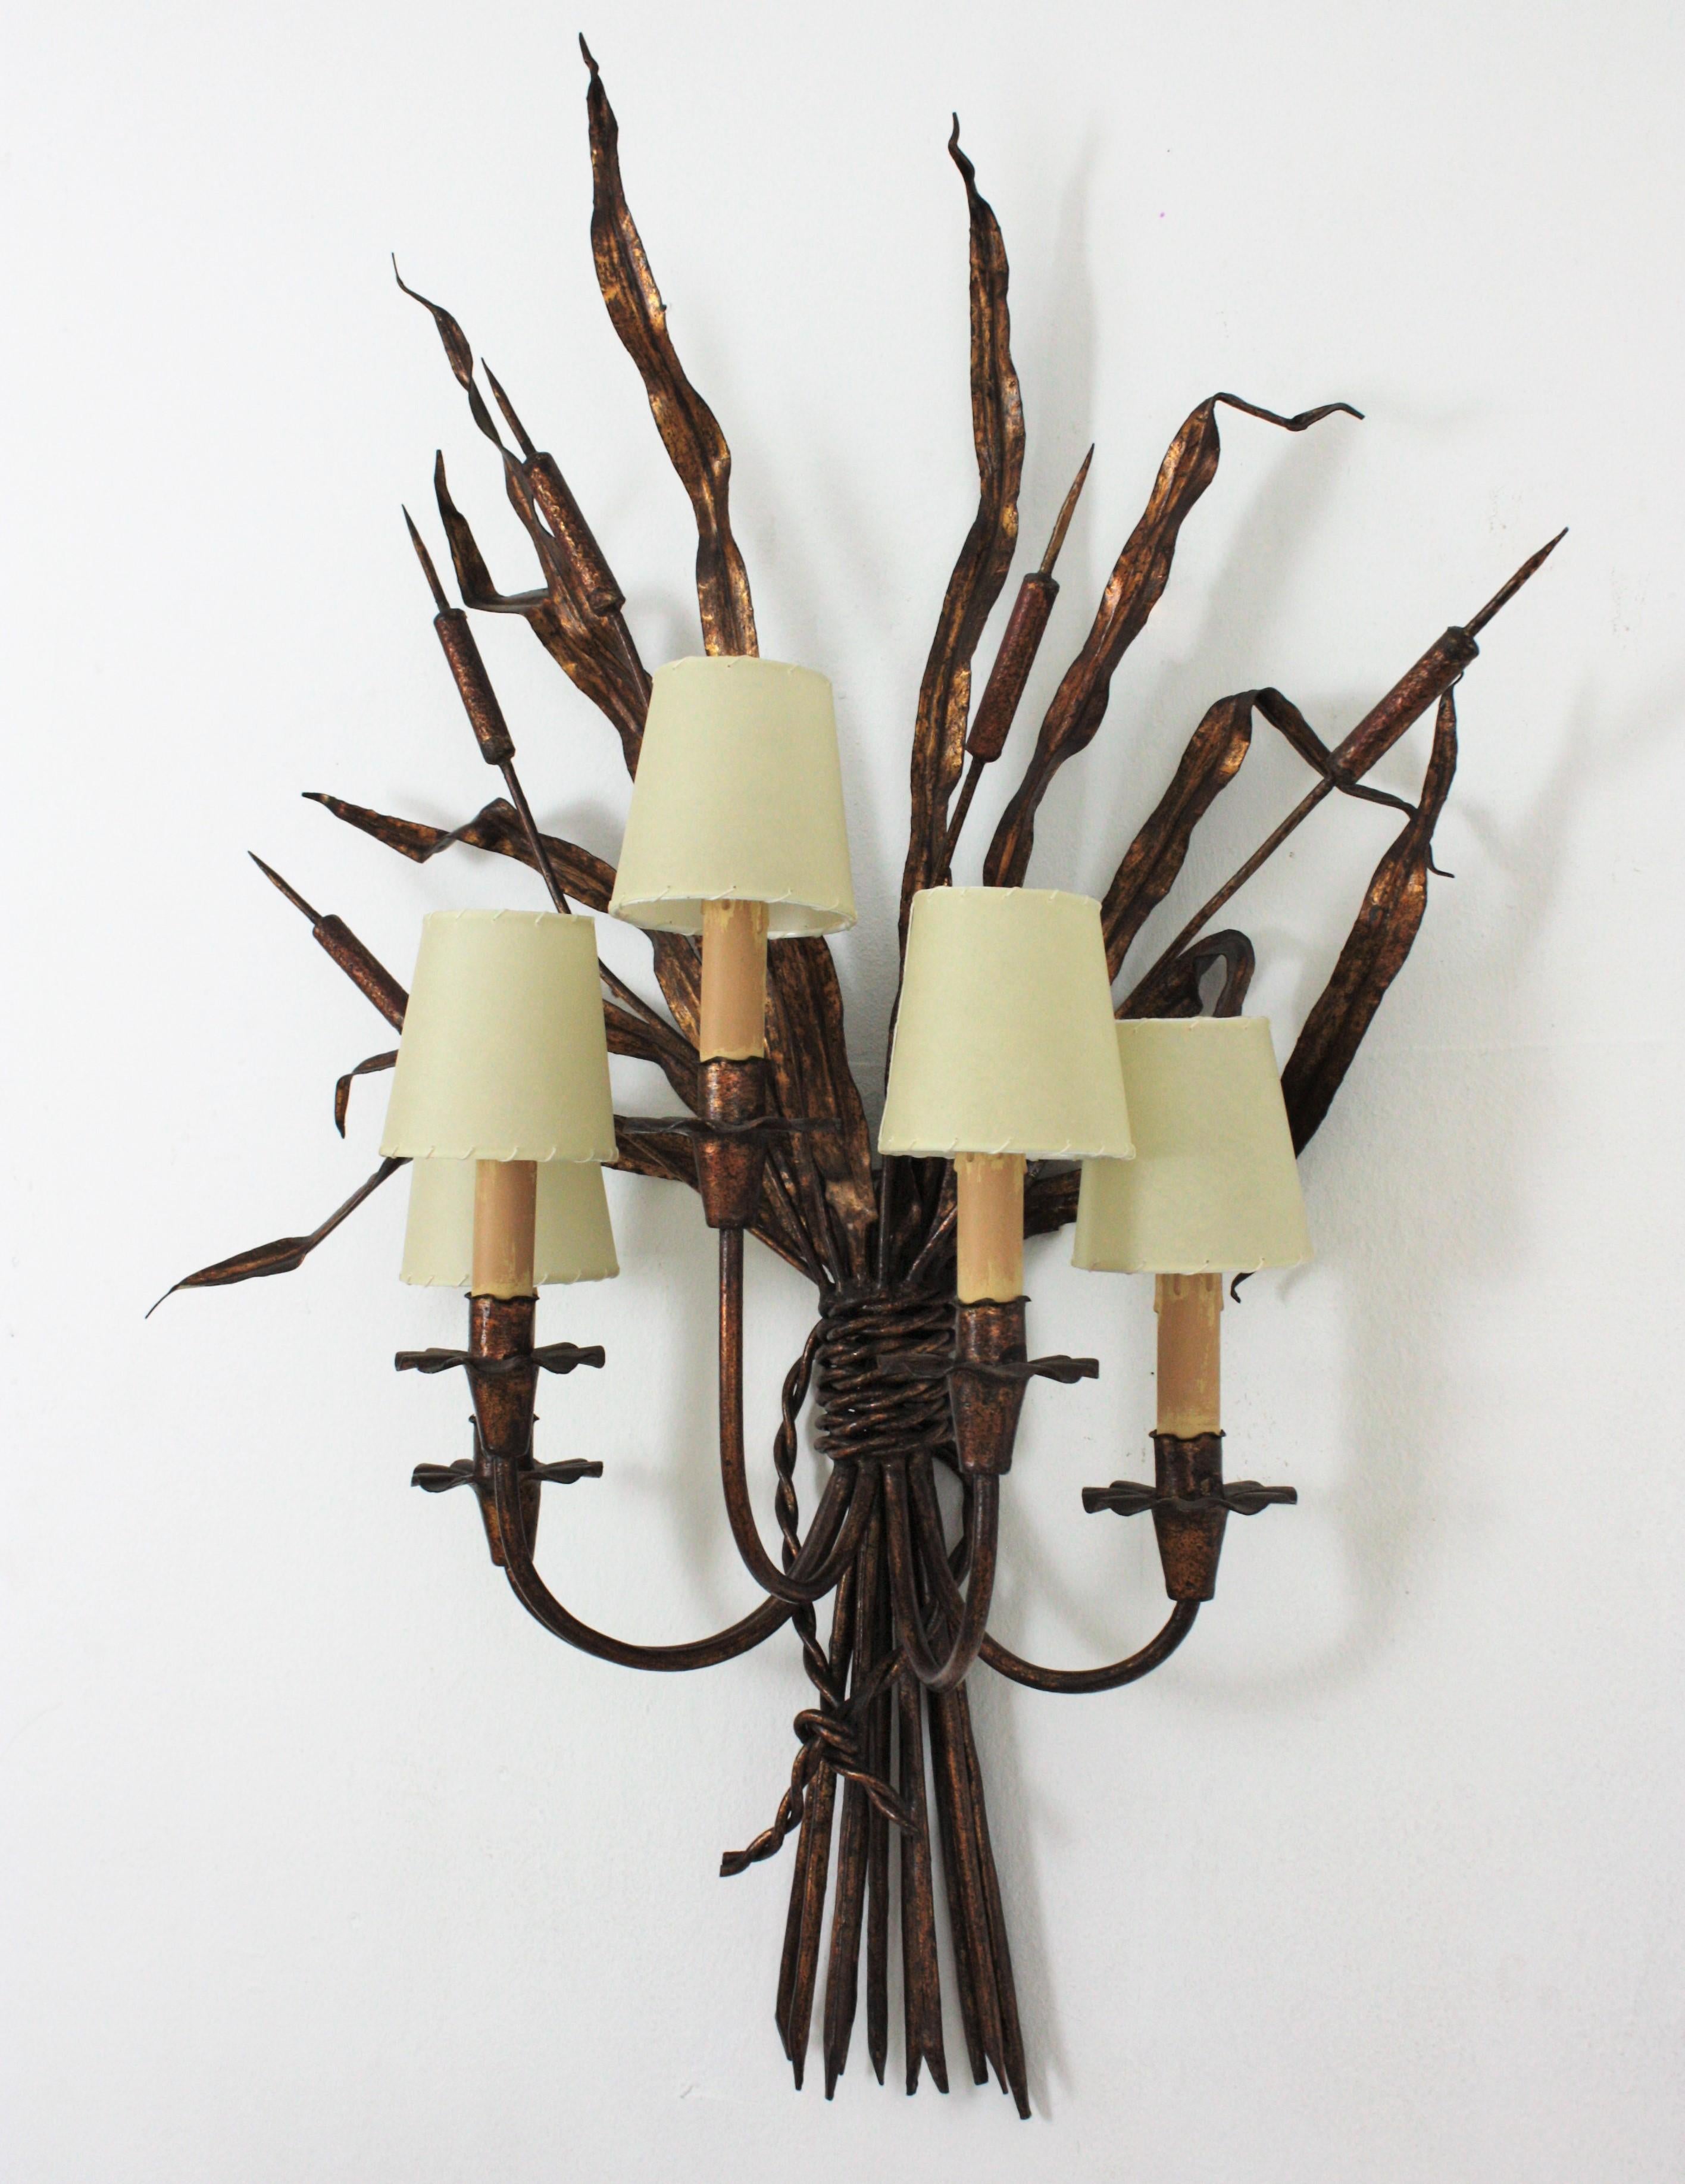 Huge Maison Baguès style parcel-gilt five-light gilt iron reeds tole wall light, France, 1950s

Outstanding large five-light gold leaf gilt iron fioliate wall sconce with decorative reeds branches.
This tole wall sconce representing reeds has 5